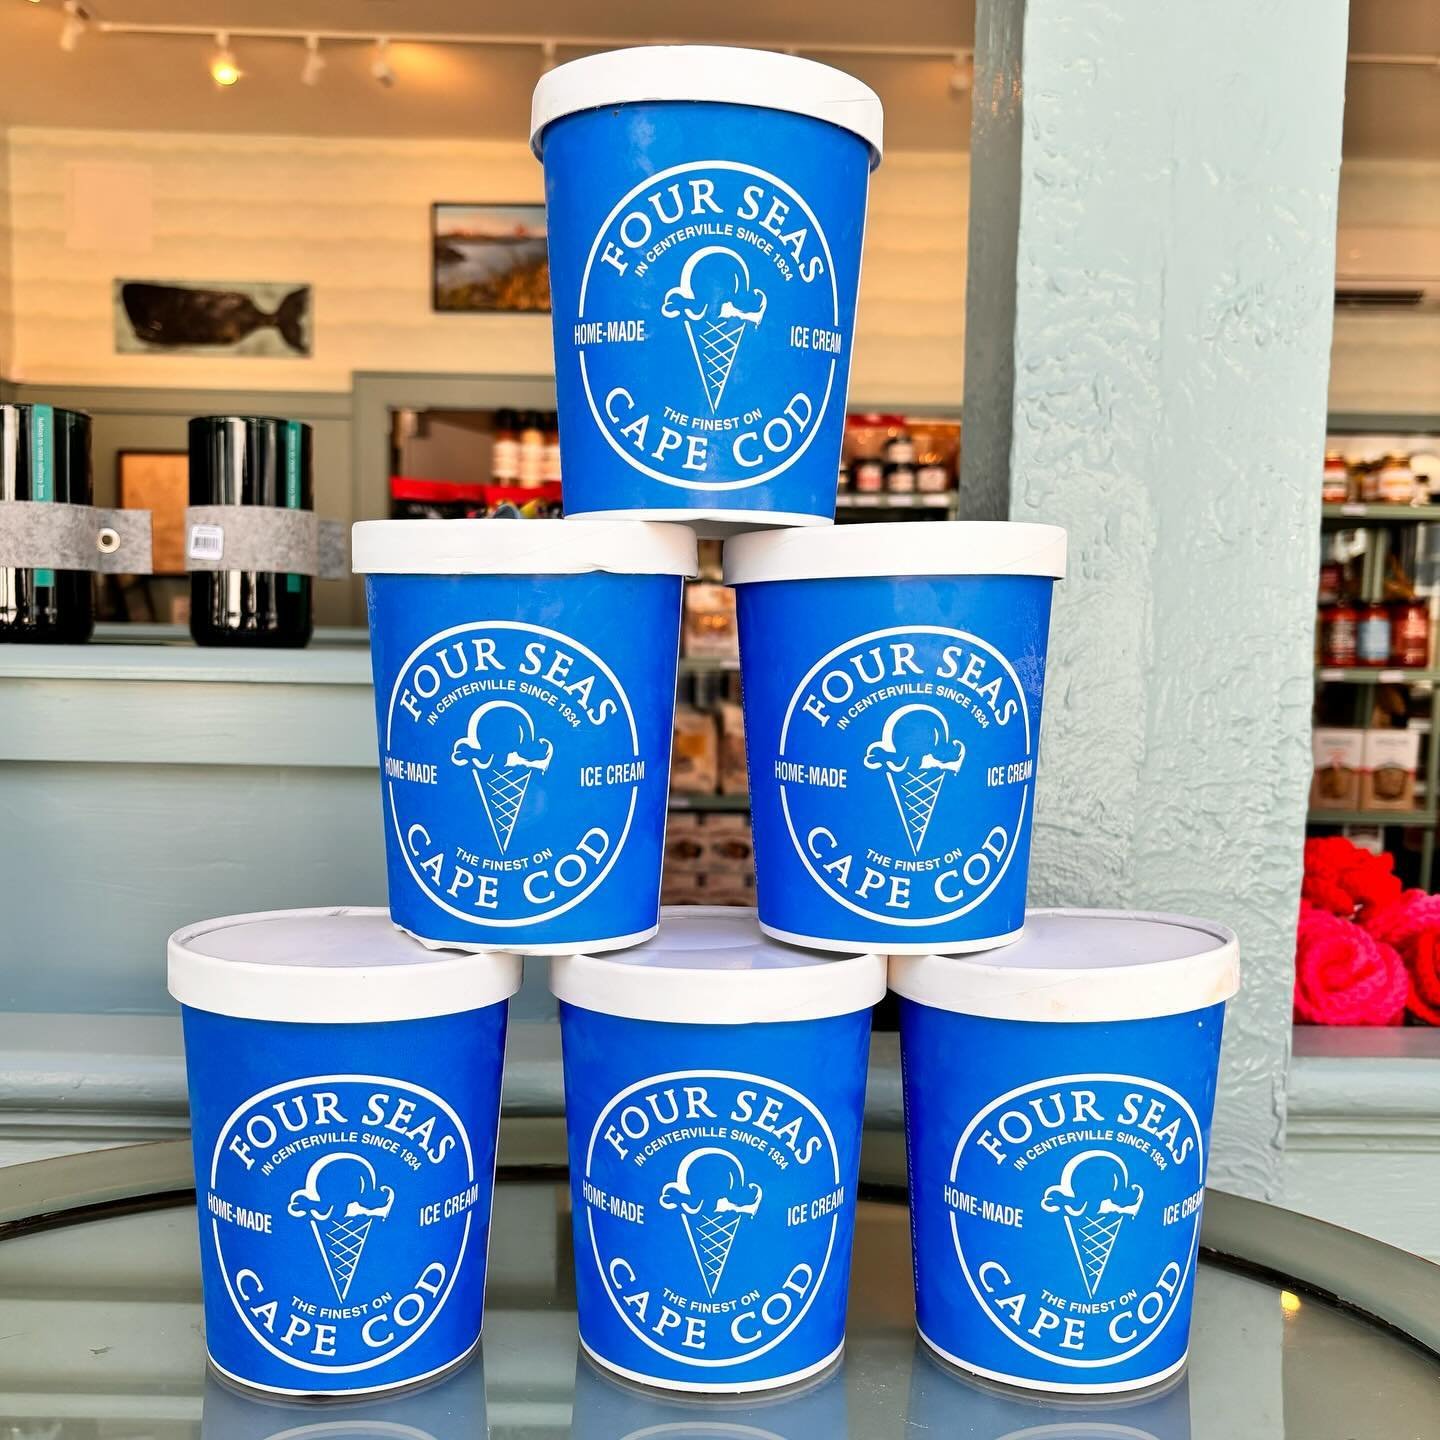 Warm day calls for Ice Cream!! 🍦 Did you know we are the only seller of Four Seas Ice Cream on the South Coast ?? Get a taste of the Cape right here at Coastal Provisions ☀️